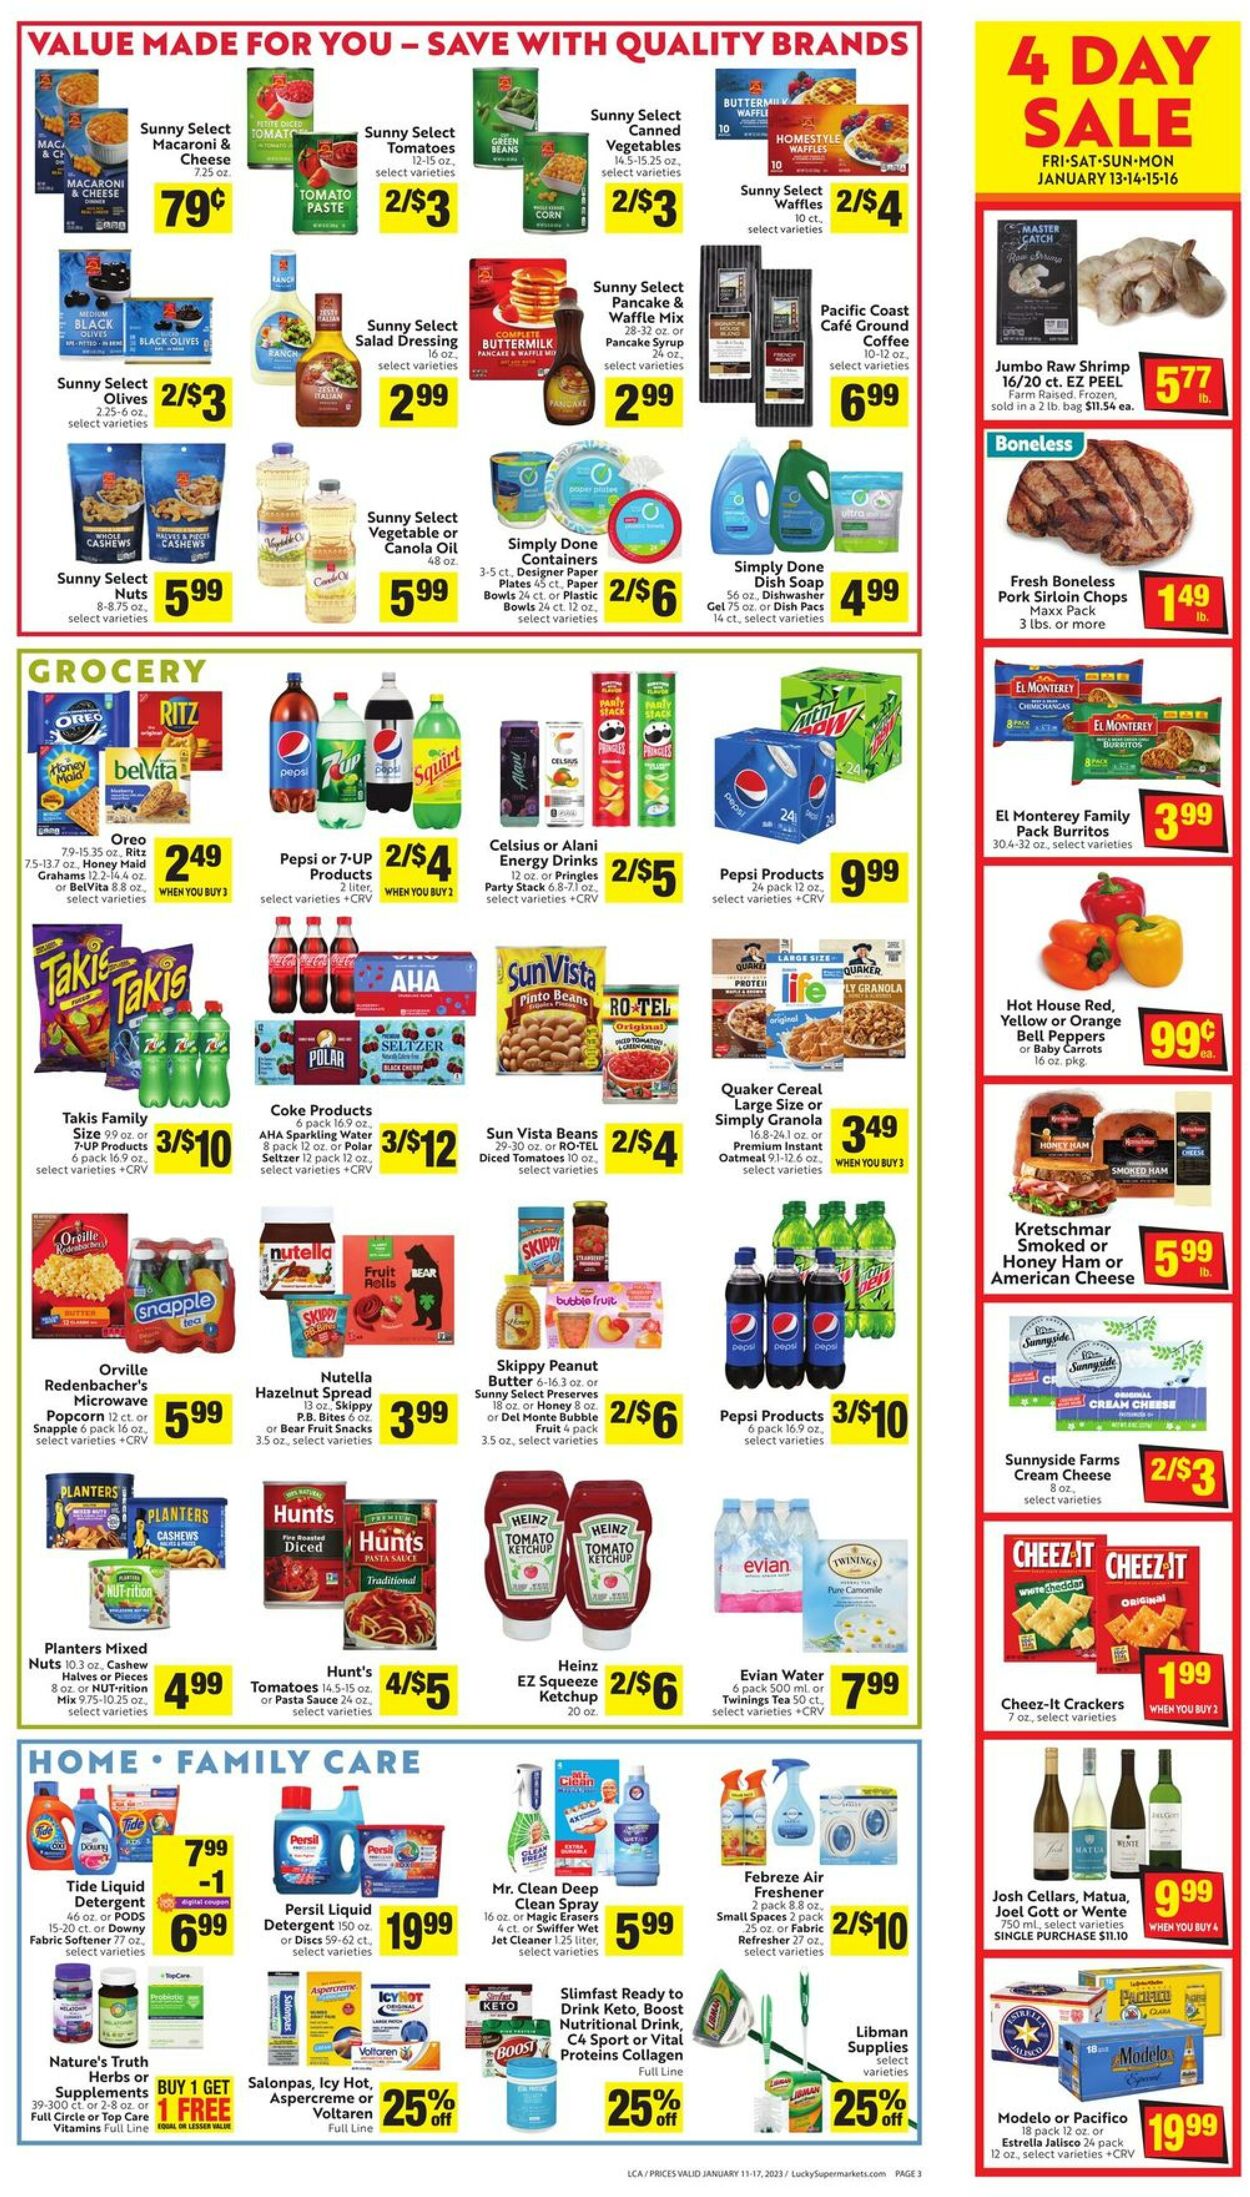 Weekly ad Lucky Supermarkets 01/11/2023 - 01/17/2023